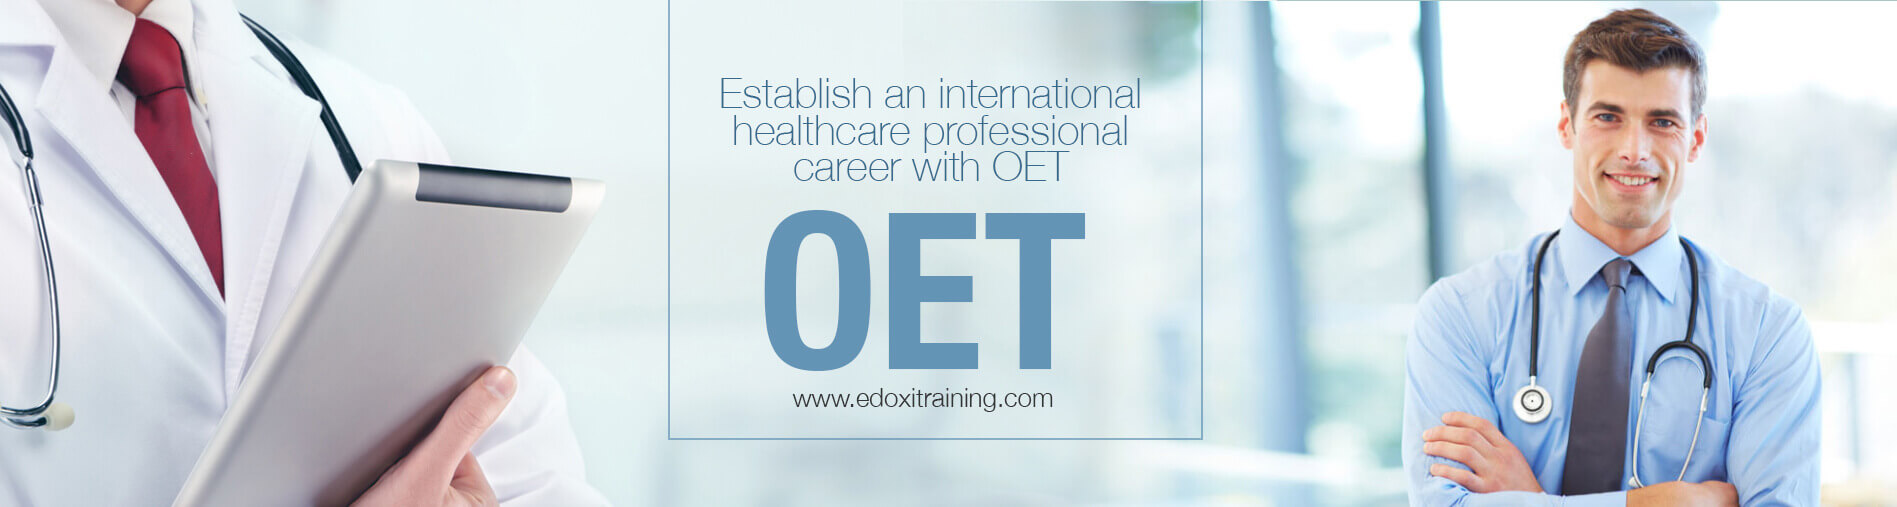 OET preparation class-Webinars and get insightful advice, tips, and strategies from the experts in Dubai, Dubai, United Arab Emirates